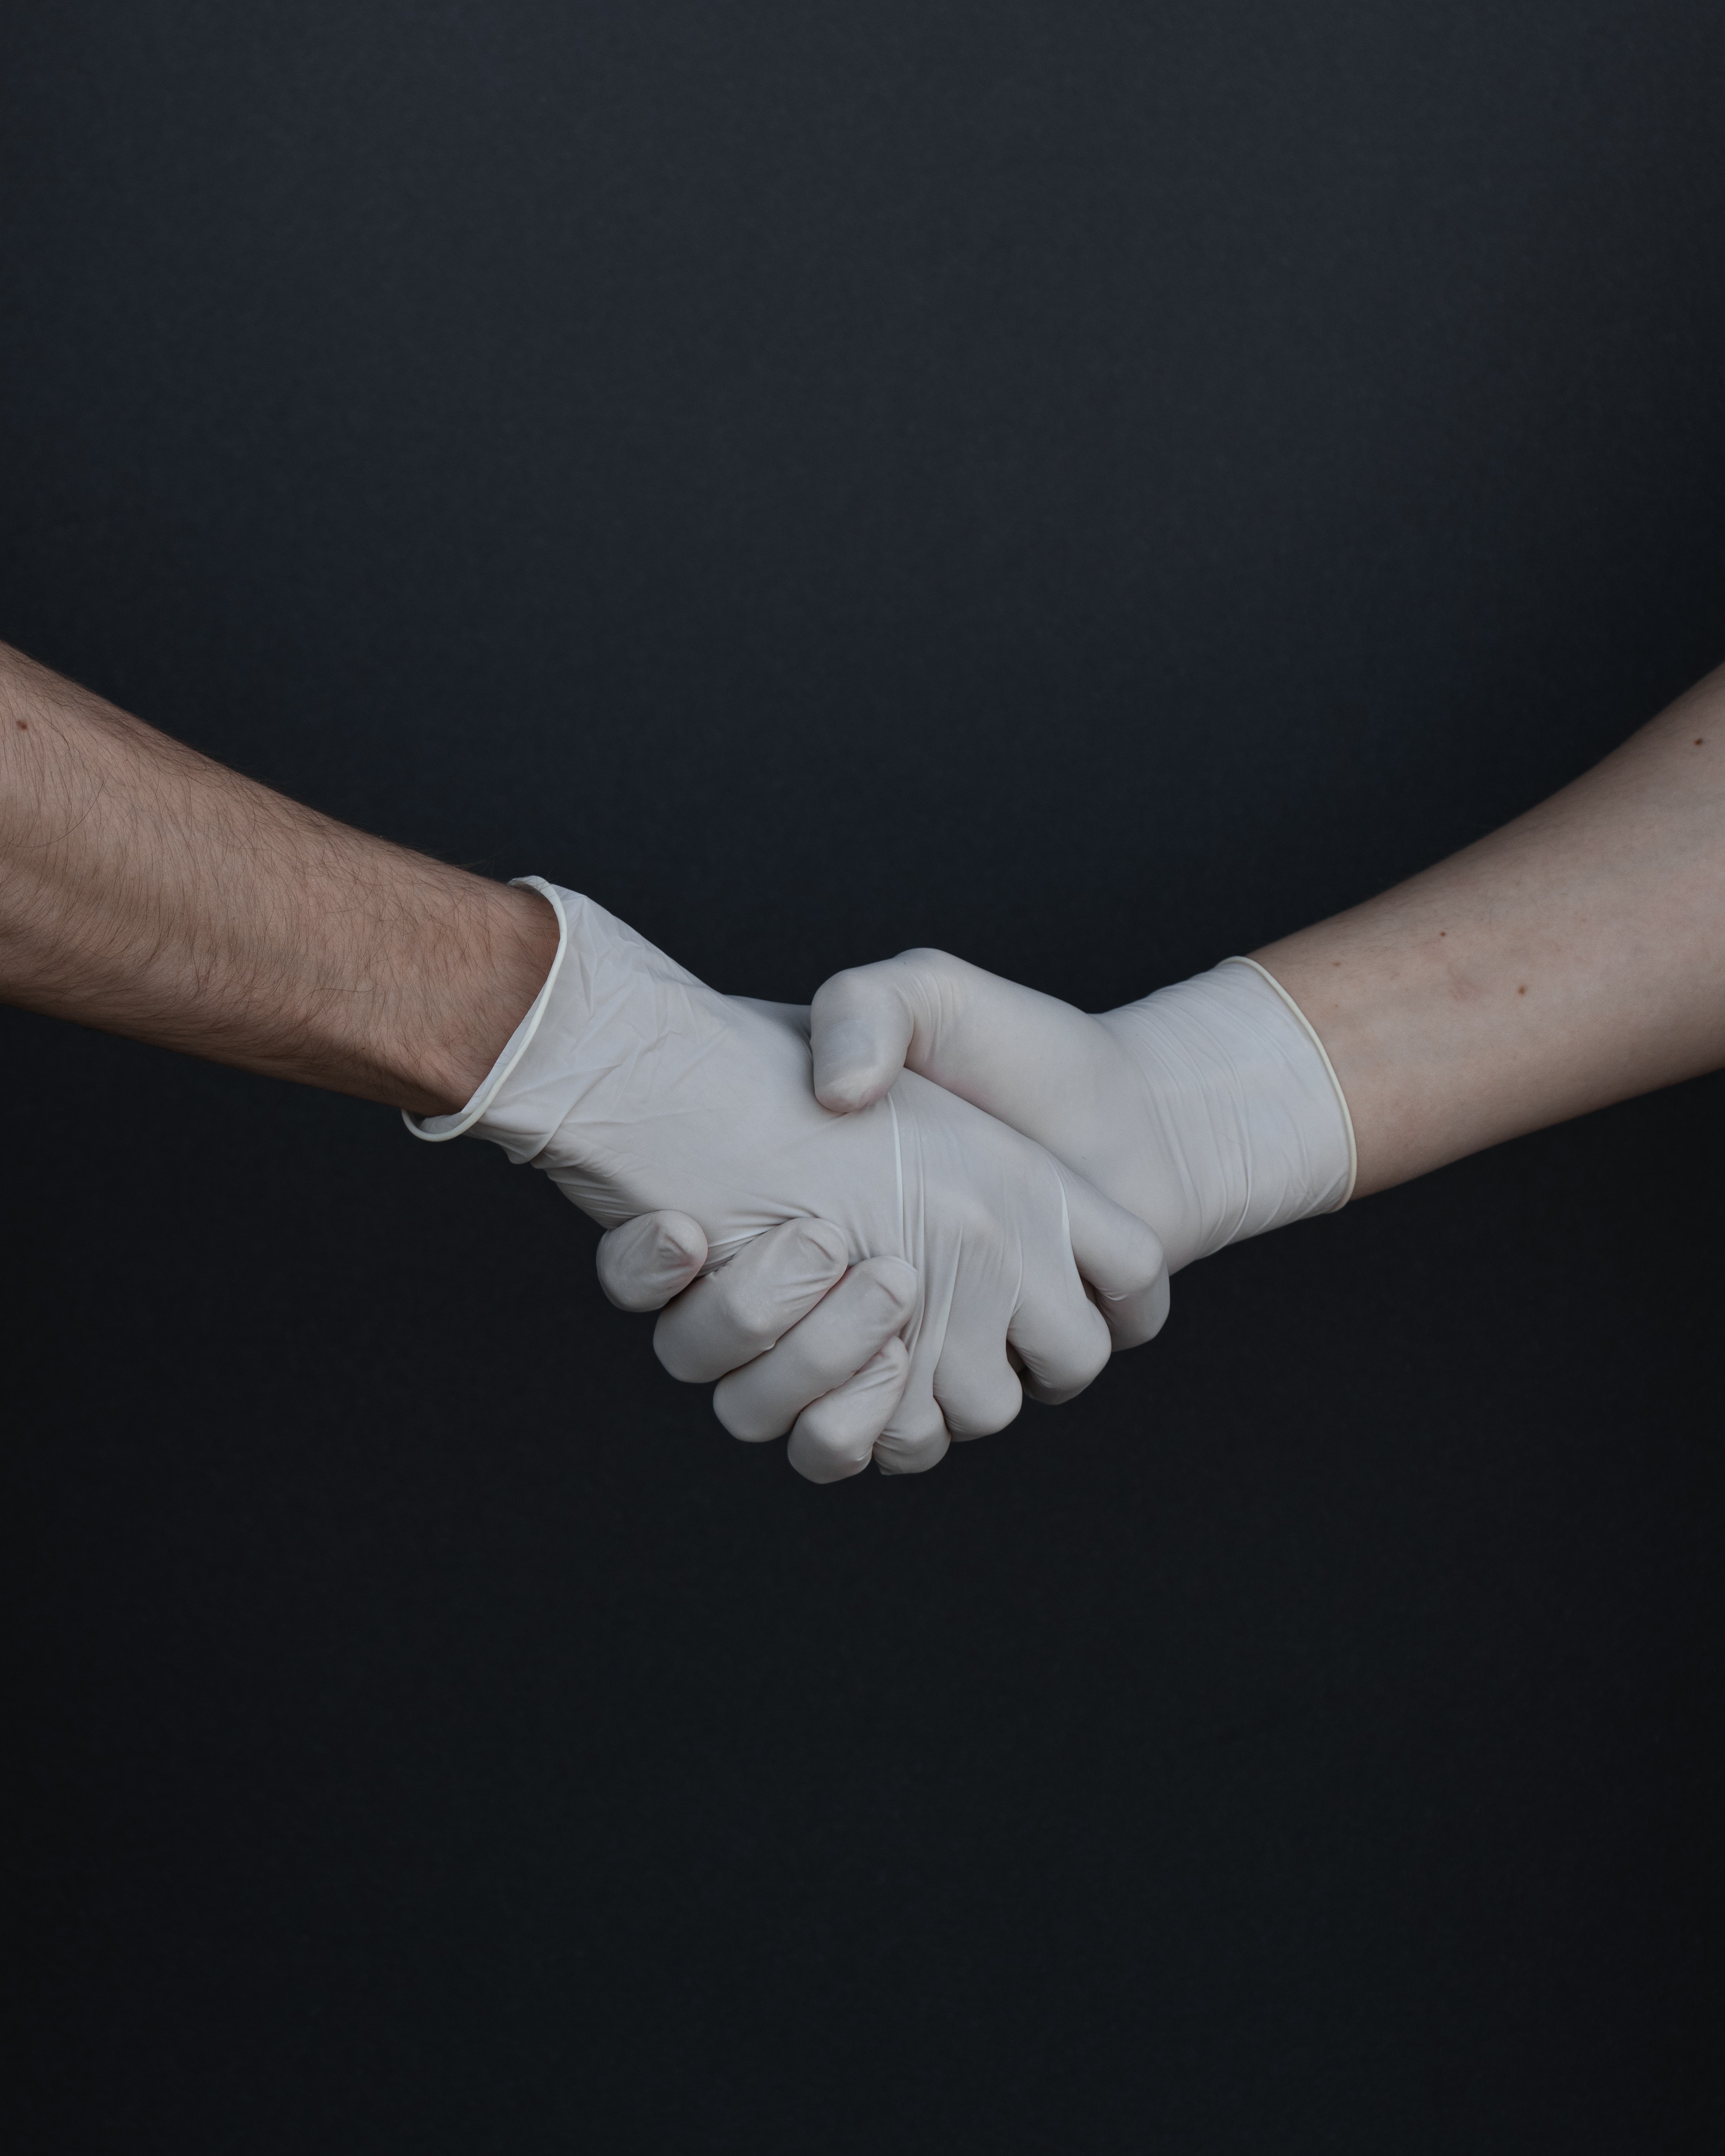 Gloves: A Substitute for Hand Hygiene or a Dangerous False Sense of Security?